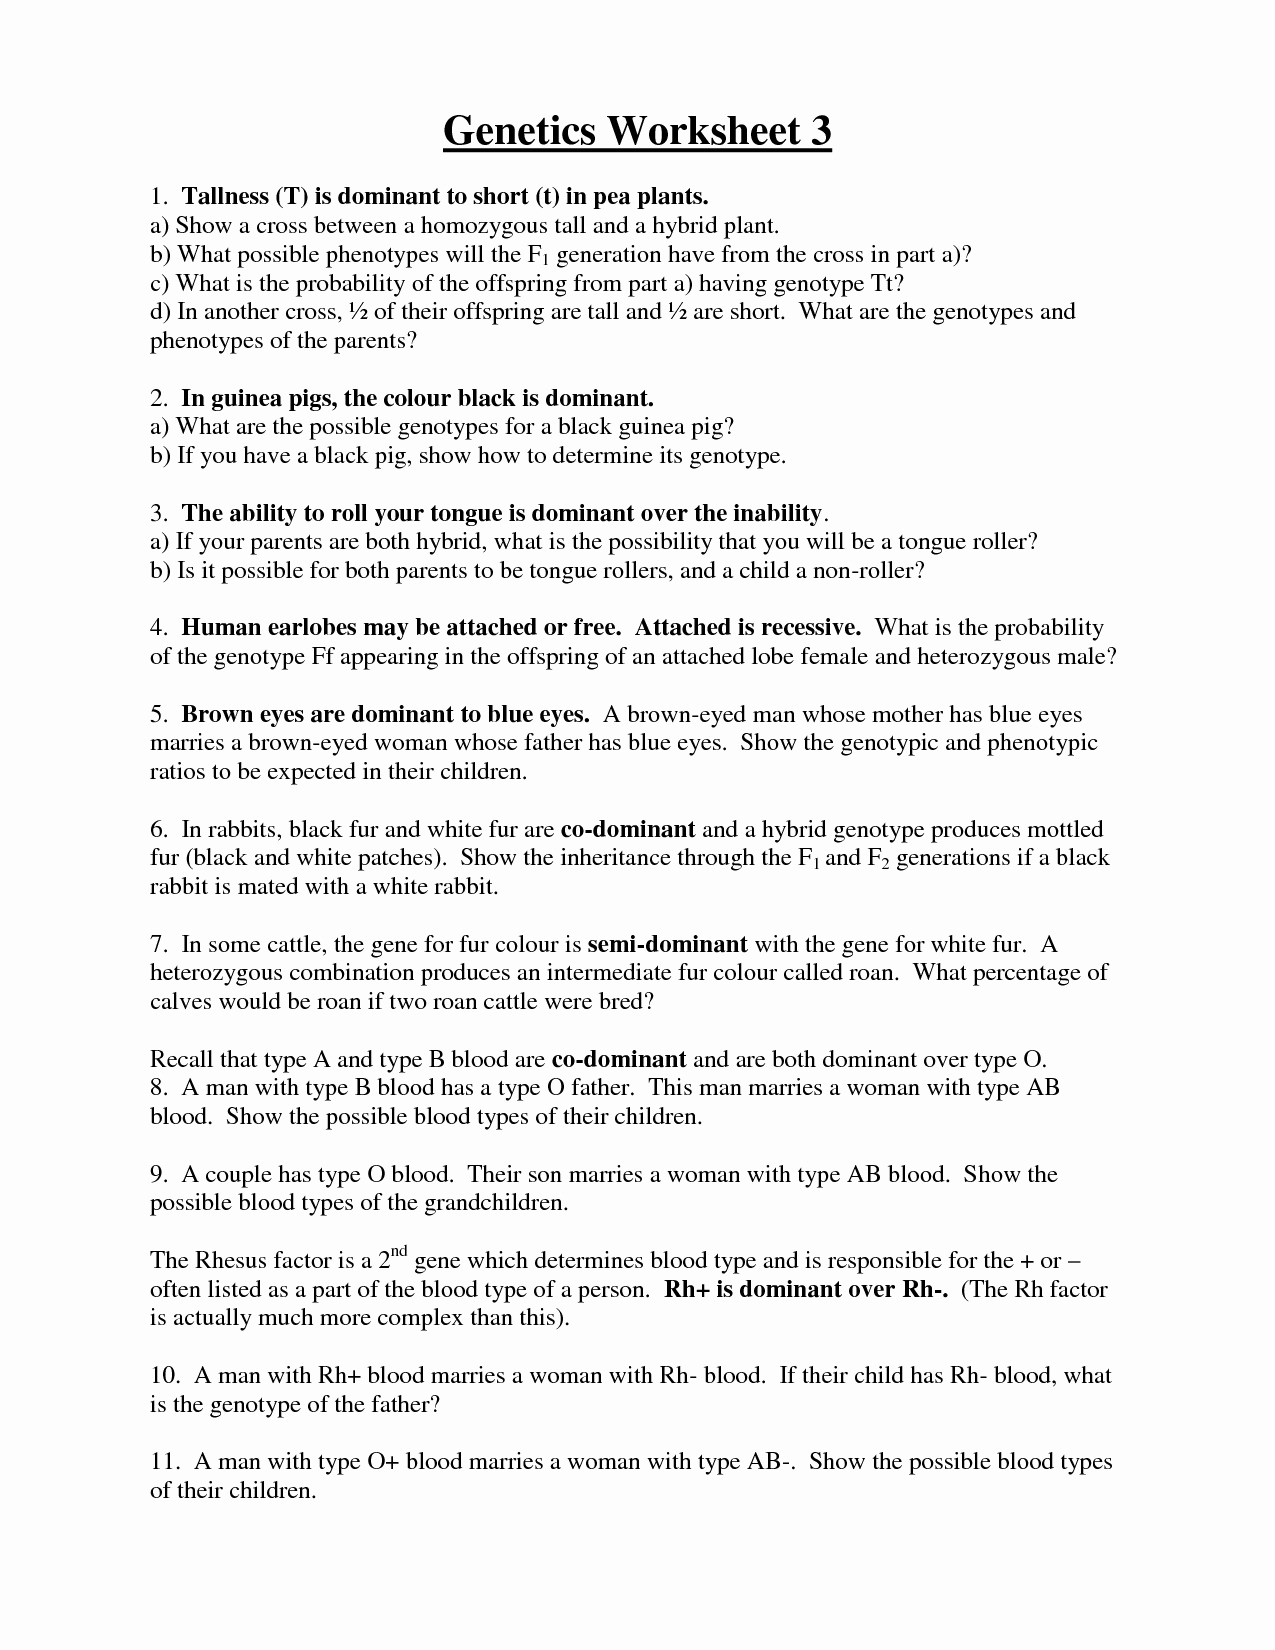 Blood Type and Inheritance Worksheet New 16 Best Of Blood Type Worksheet Answer Key